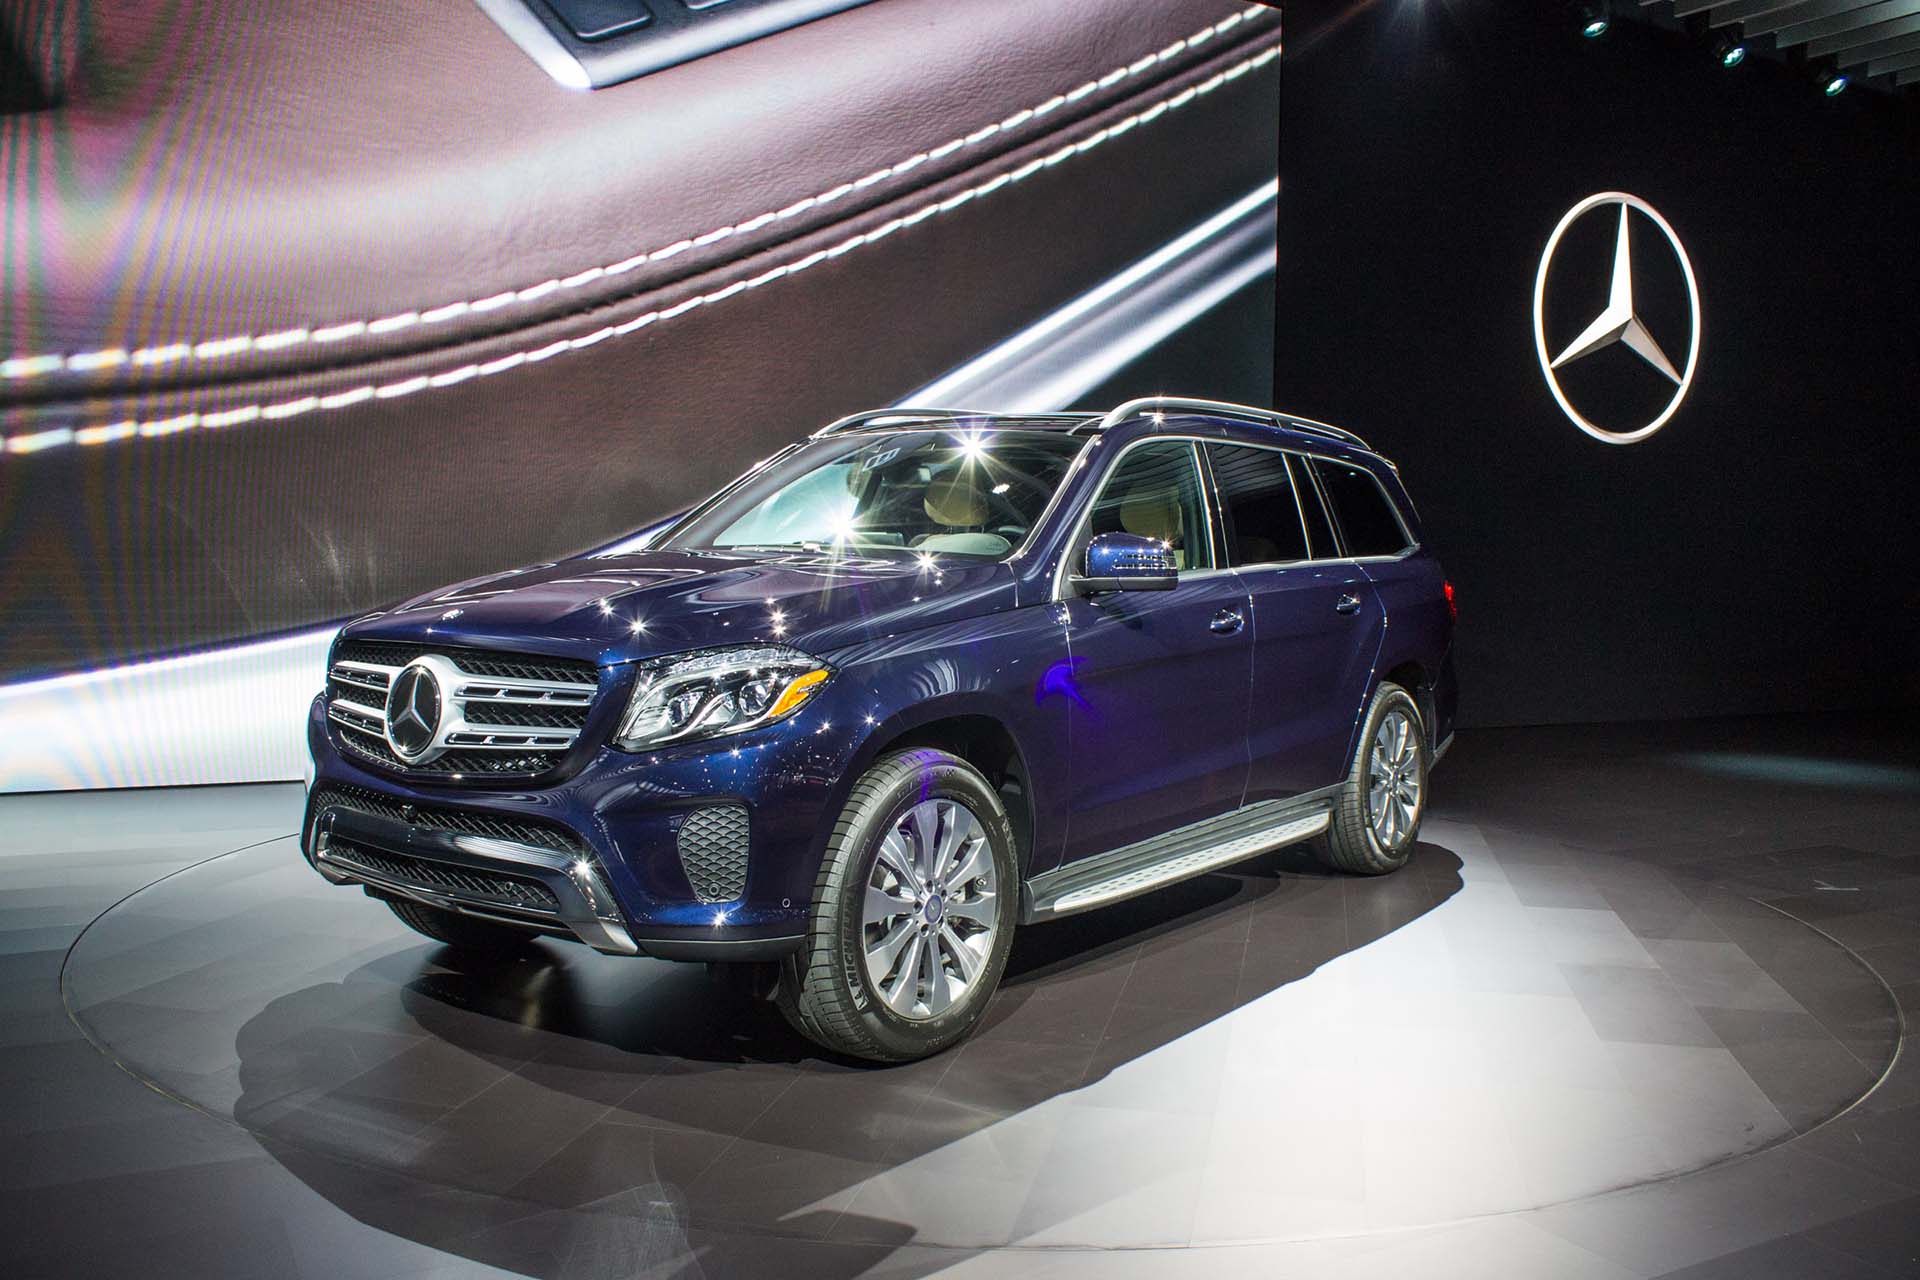 The GLS crossover/SUV is the “German Suburban” replacement for the GL class. While the exterior treatment is a similar nip and tuck to the SL’s freshening, there’s a bit more technology behind the scenes, including a new nine-speed automatic that you can expect to start showing up in more 4Matic-equipped cars as time goes on.